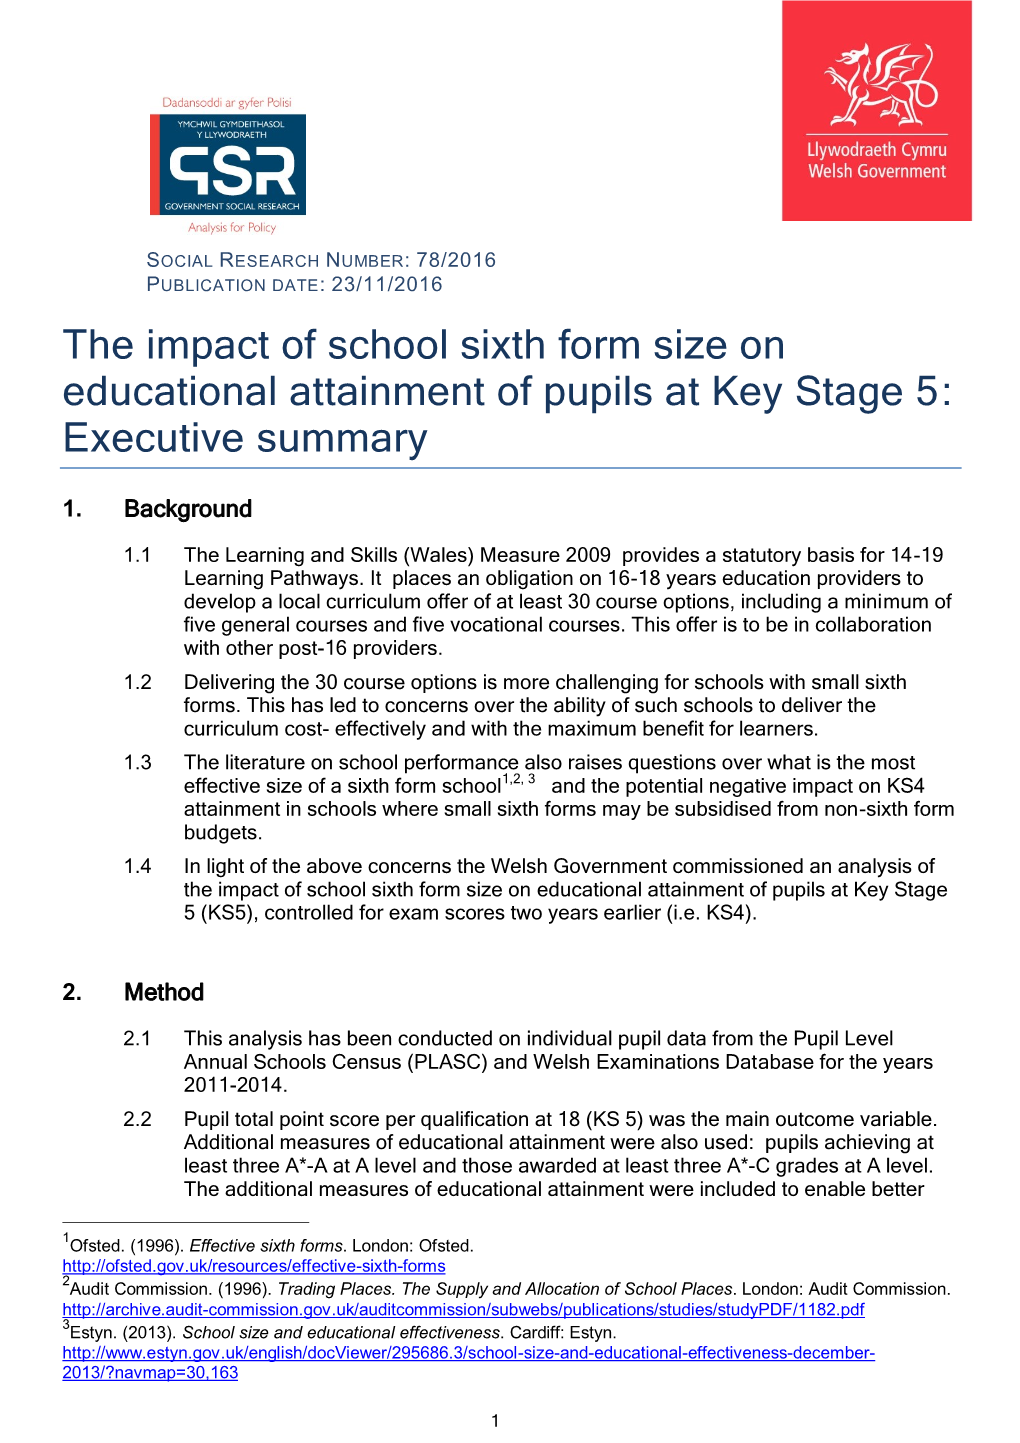 The Impact of School Sixth Form Size on Educational Attainment of Pupils at Key Stage 5: Executive Summary